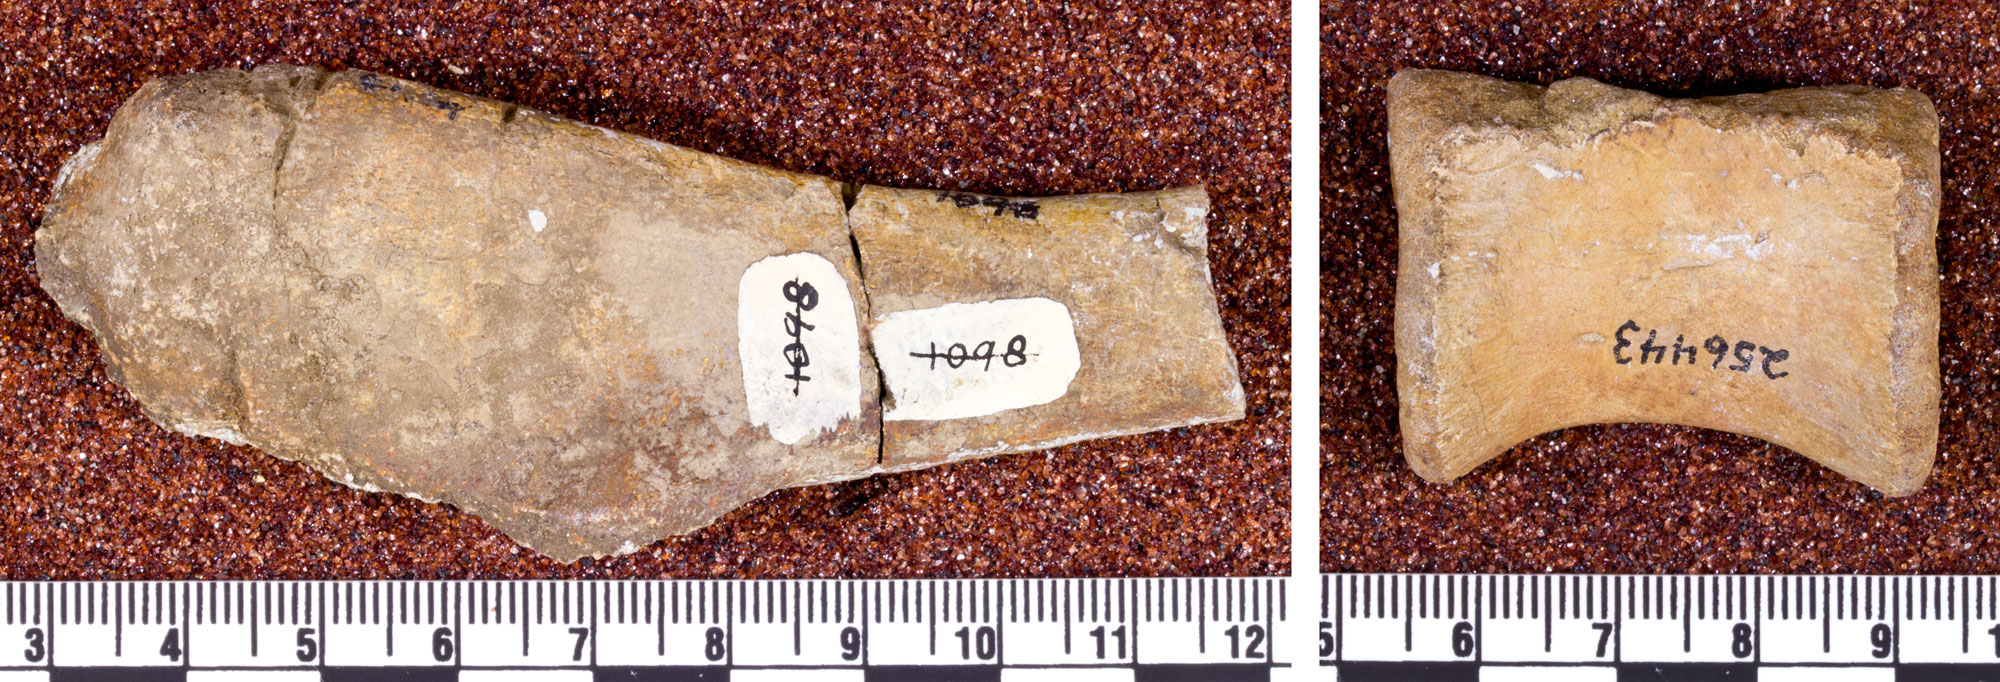 2-panel image showing photographs of bone fragments from a Jurassic sea crocodile found in Oregon. Panel 1: Partial upper arm bone. The bone is oriented horizontally, with a rounded end to the left and a broken end to the right. It is about 9 centimeters long. Panel 2: Part of a vertebra.